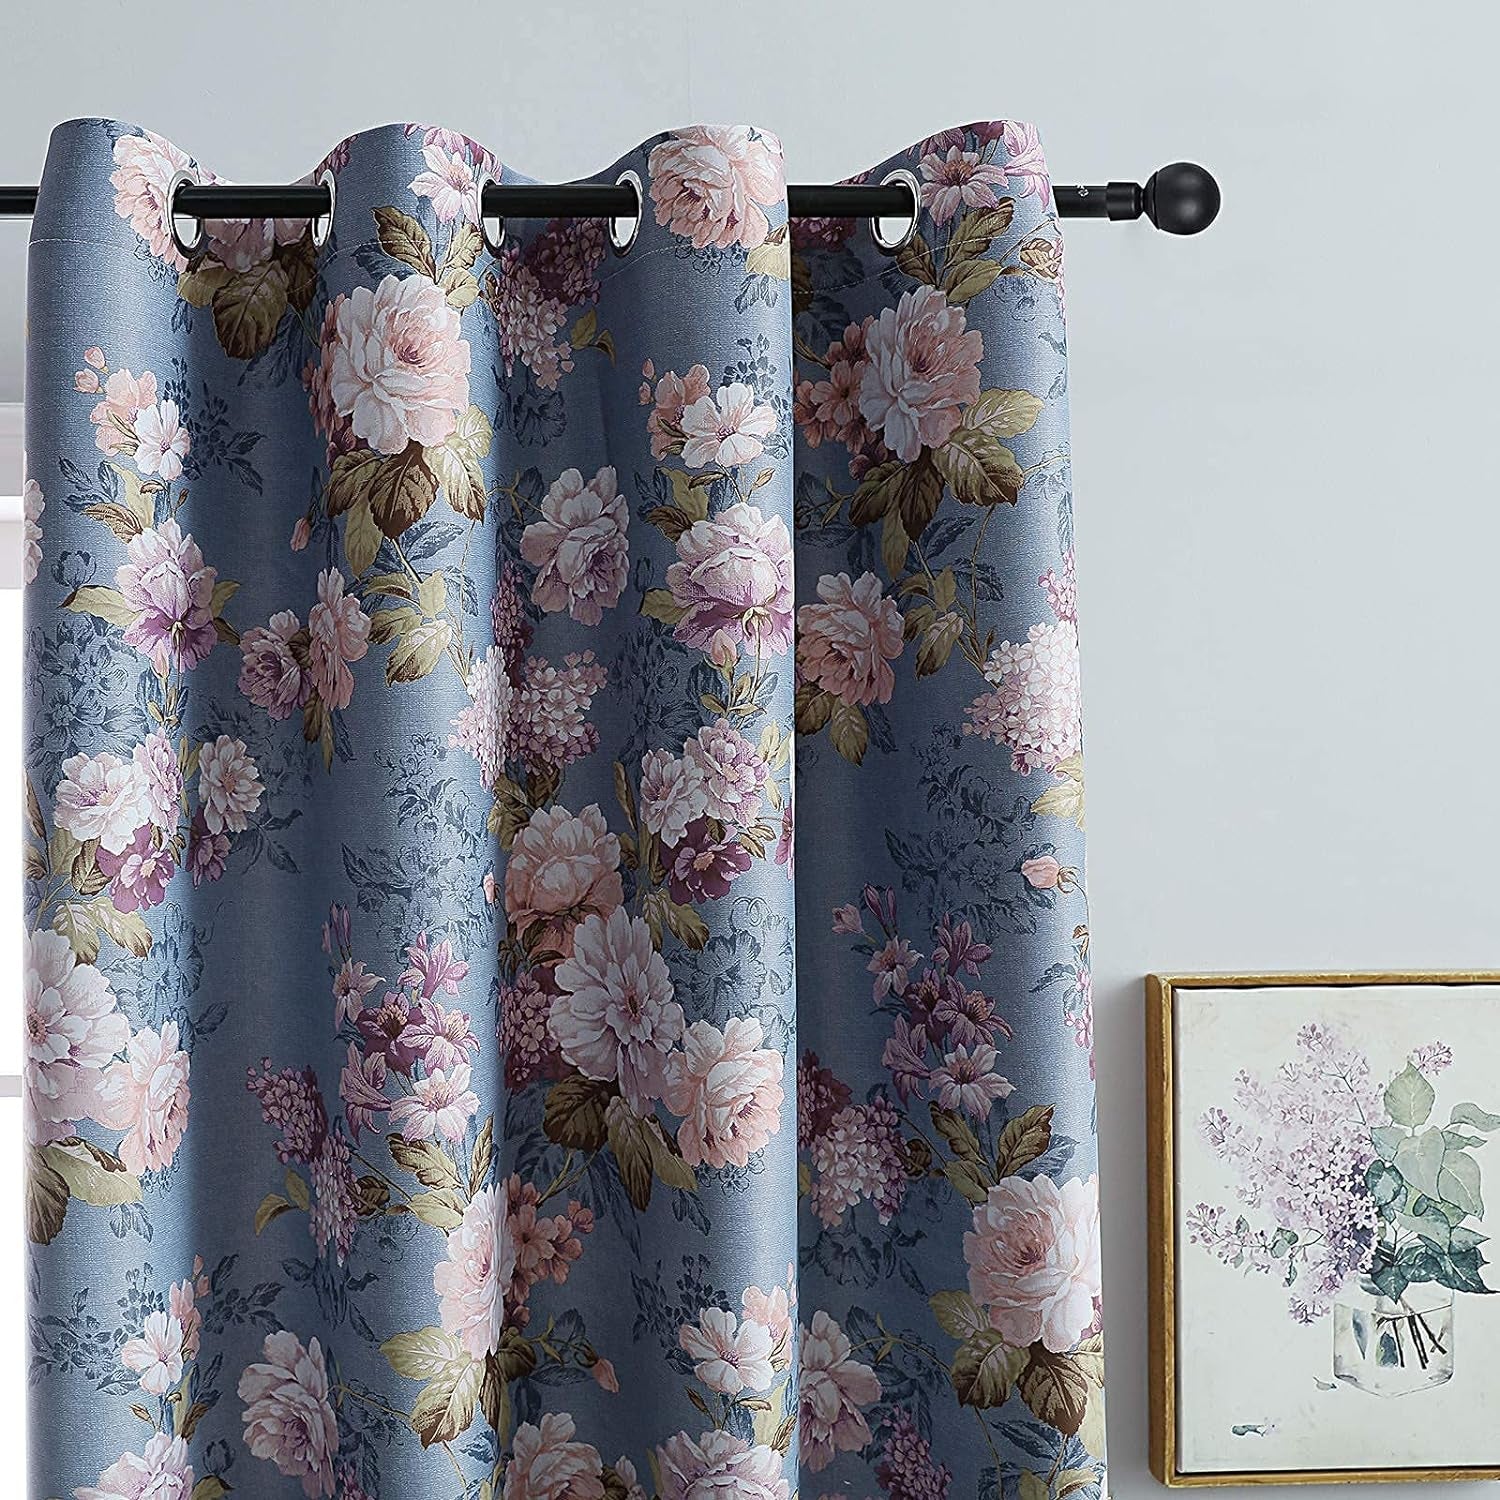 SUOUO Double Sided Floral Blackout Curtains for Bedroom Patterned Vintage Flower Thermal Insulated Window Drapes Room Darkening for Living Room 2 Panels 84 Inches Long Blue  SUOUO   